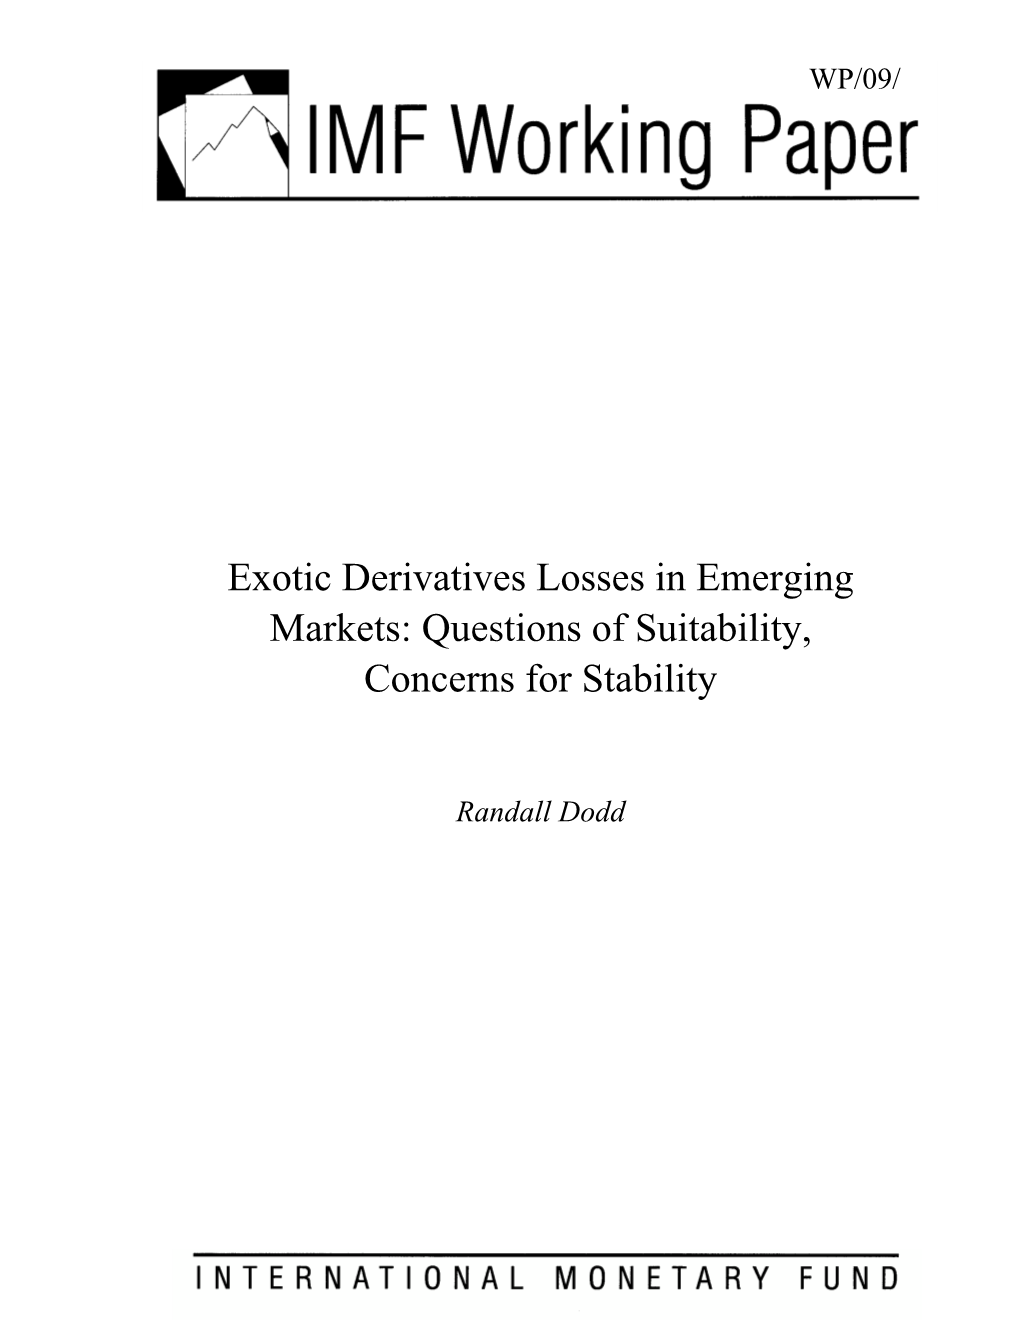 Exotic Derivatives Losses in Emerging Markets: Questions of Suitability, Concerns for Stability